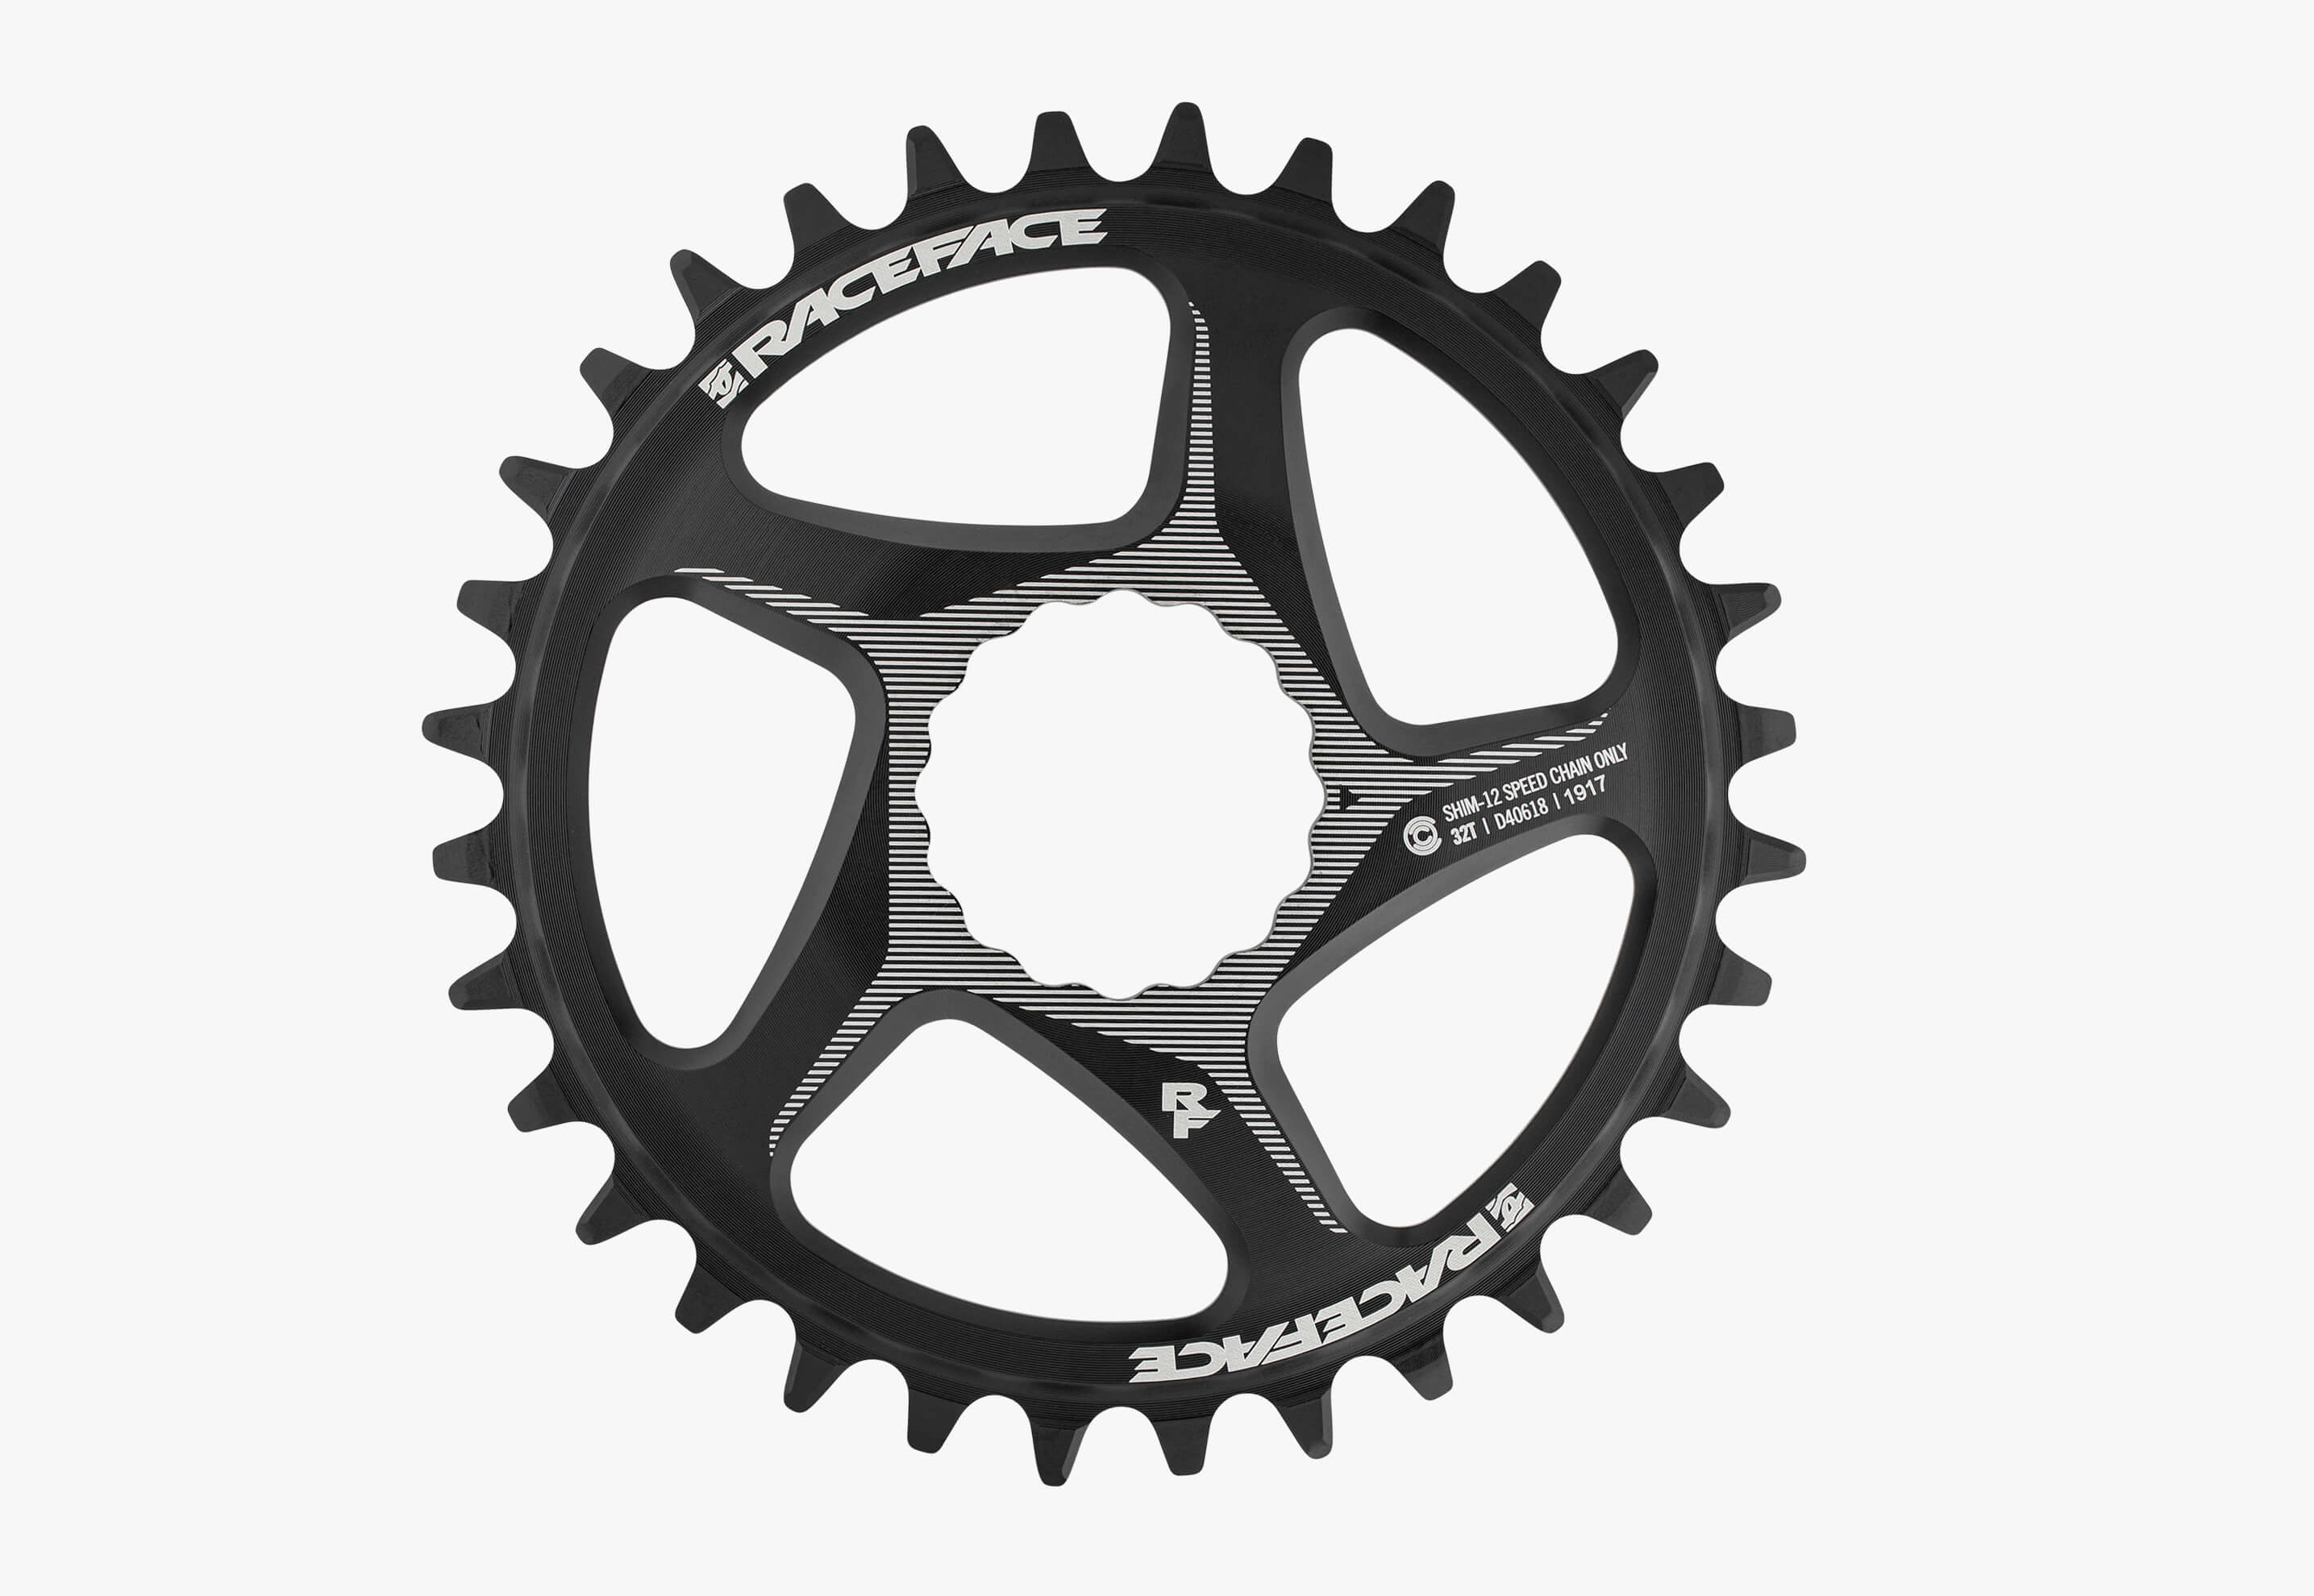 1x Chainring, Cinch Direct Mount - SHI 12 – Race Face